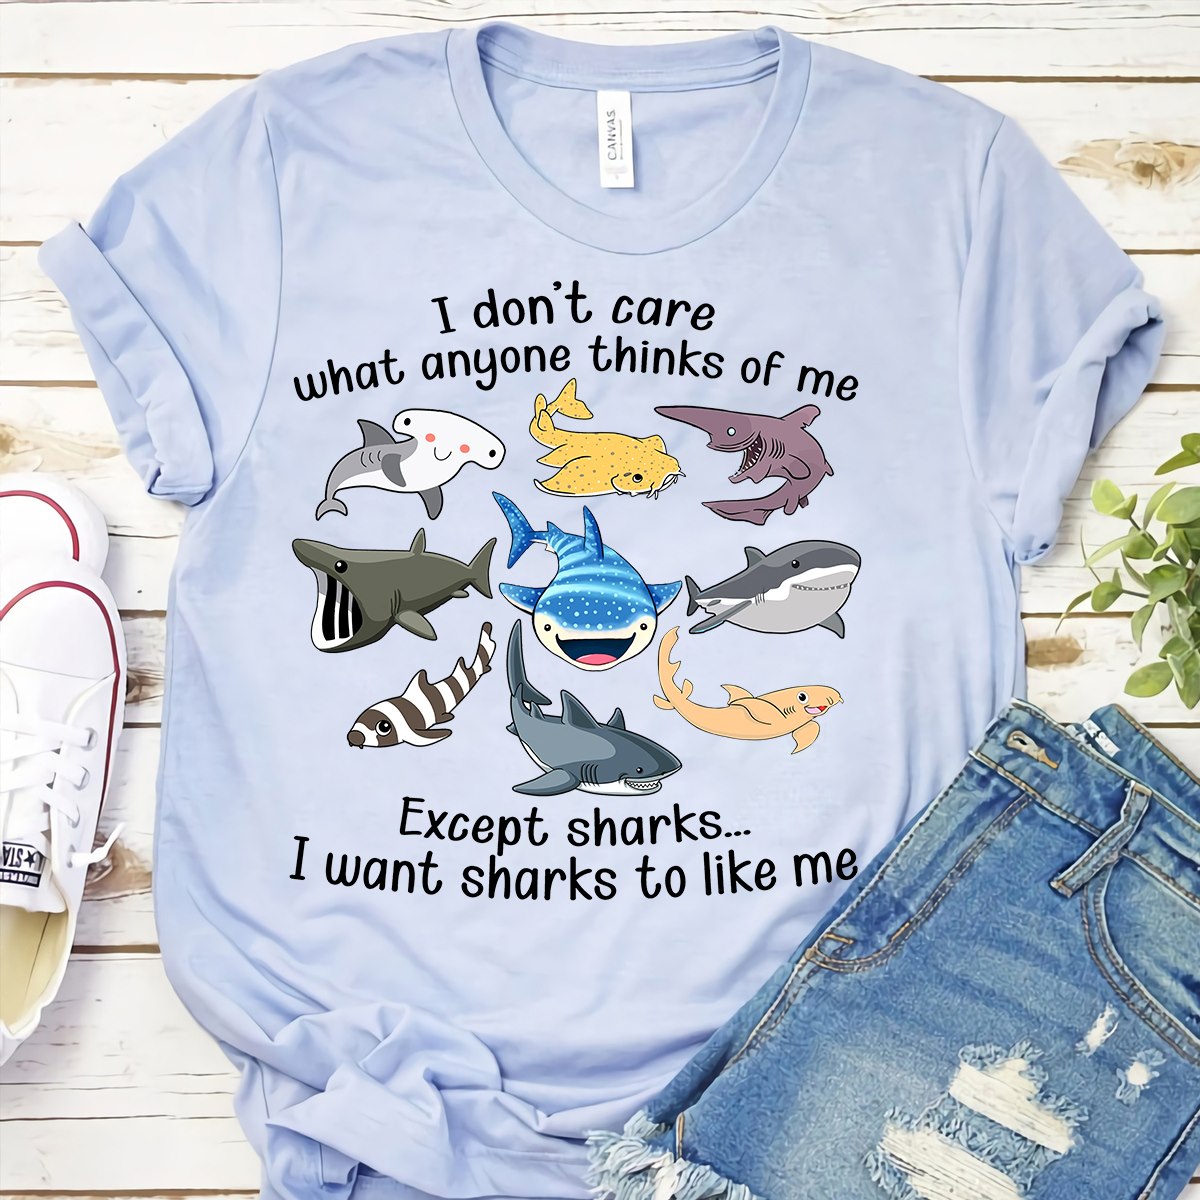 I don't care anyone thinks of me except sharks I want sharks to like me - Shark lover